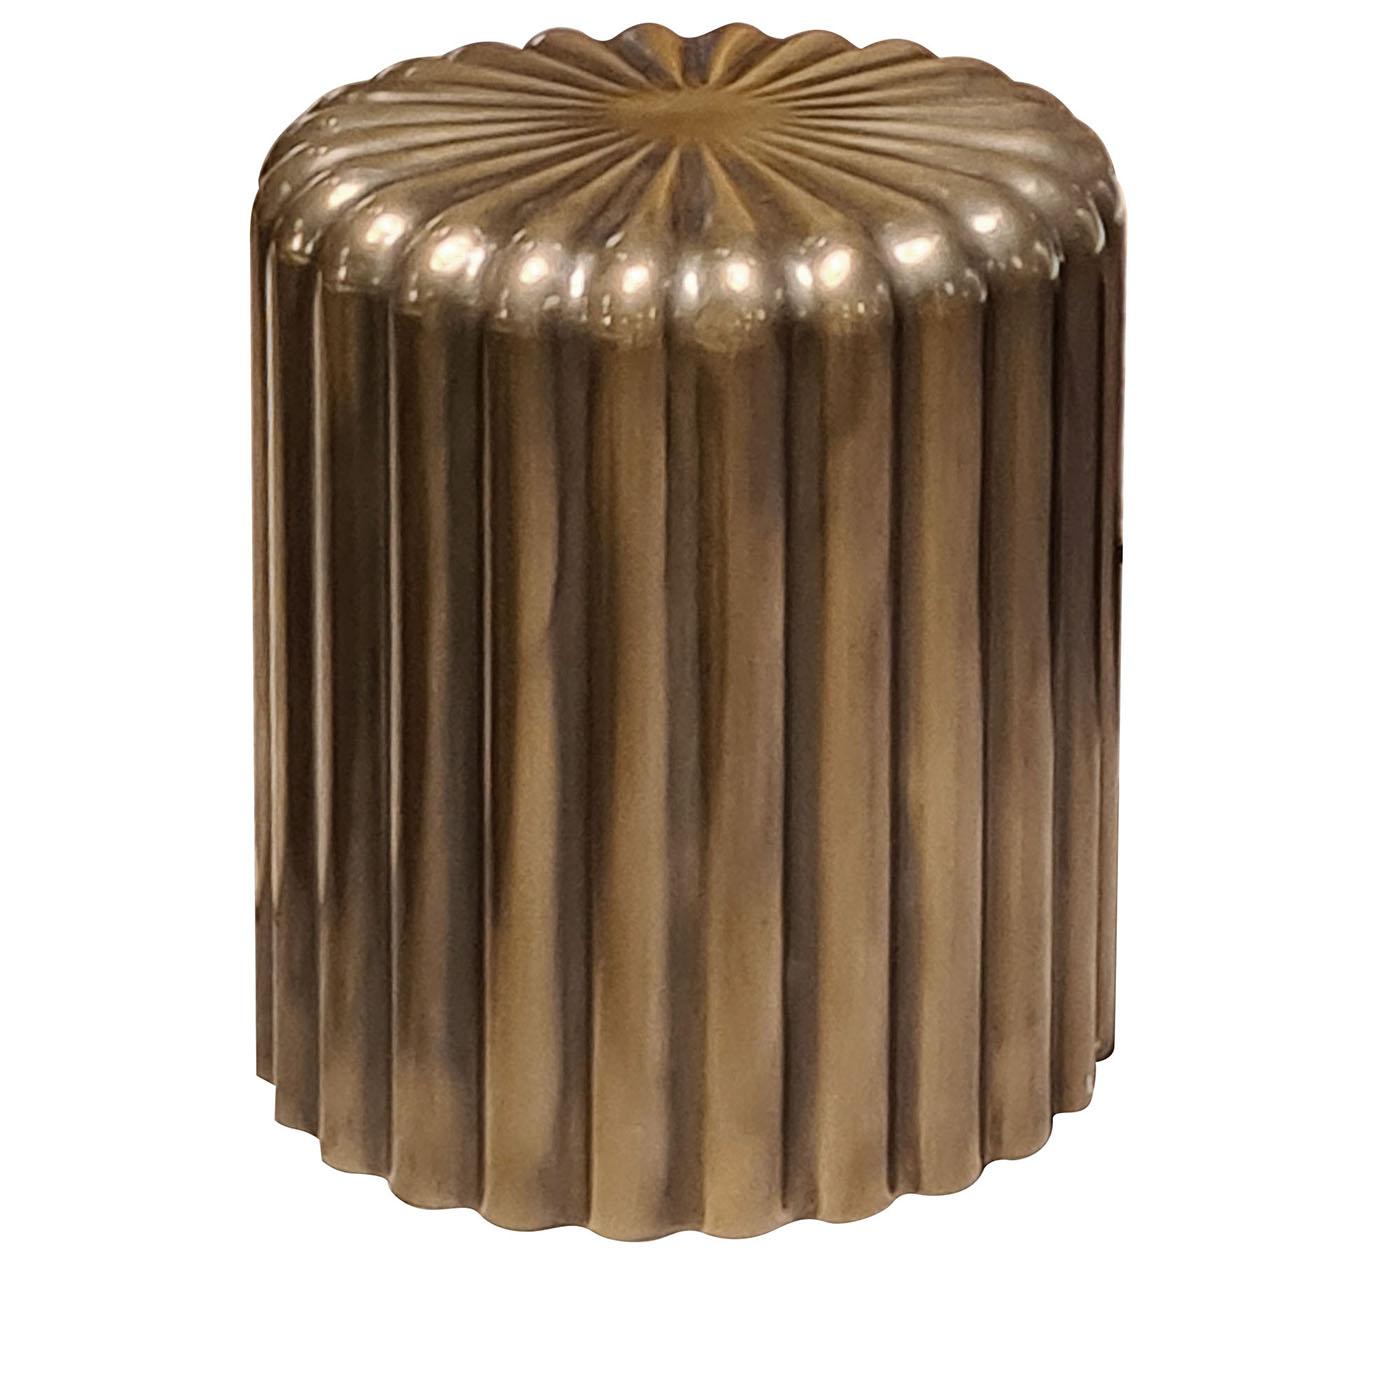 2 ED/20 281 Babylon - Decor Pouf - Limited Edition In New Condition For Sale In Milan, IT